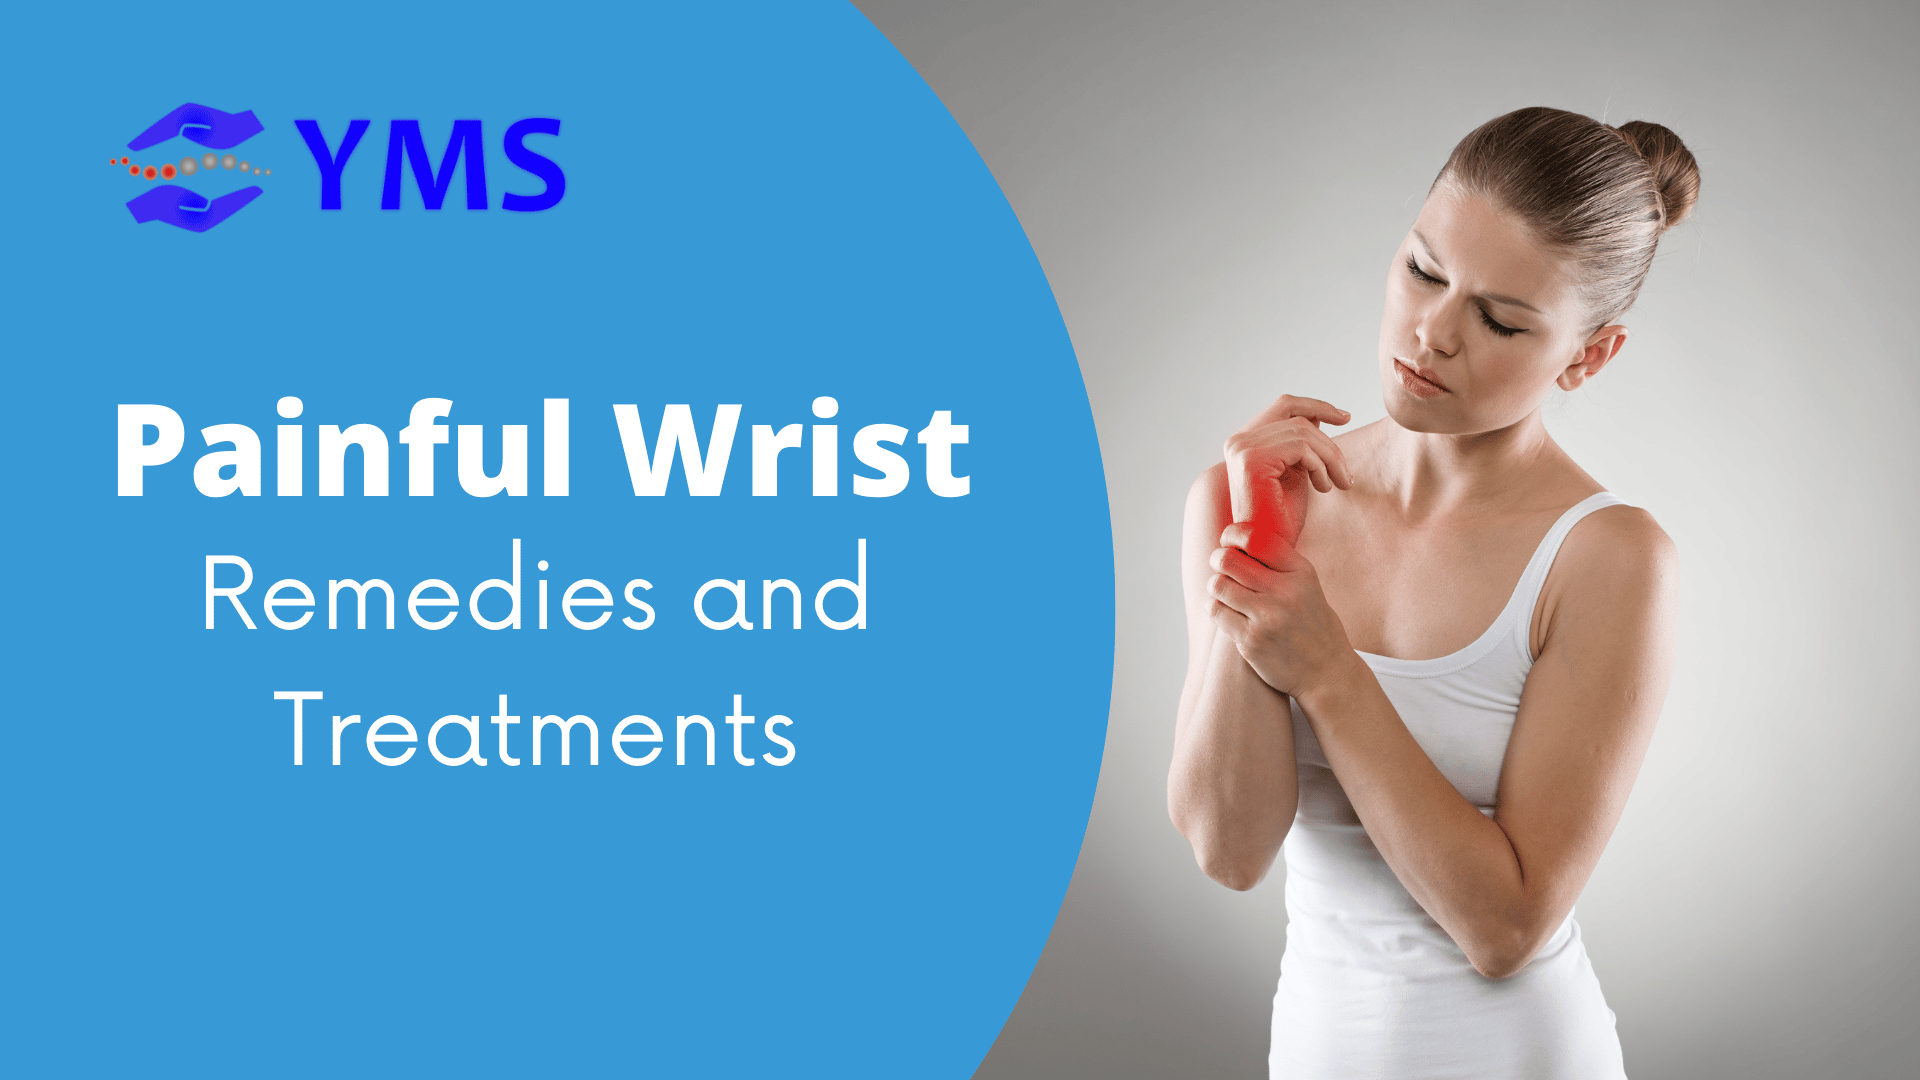 Painful wrist remedies and treatment banner